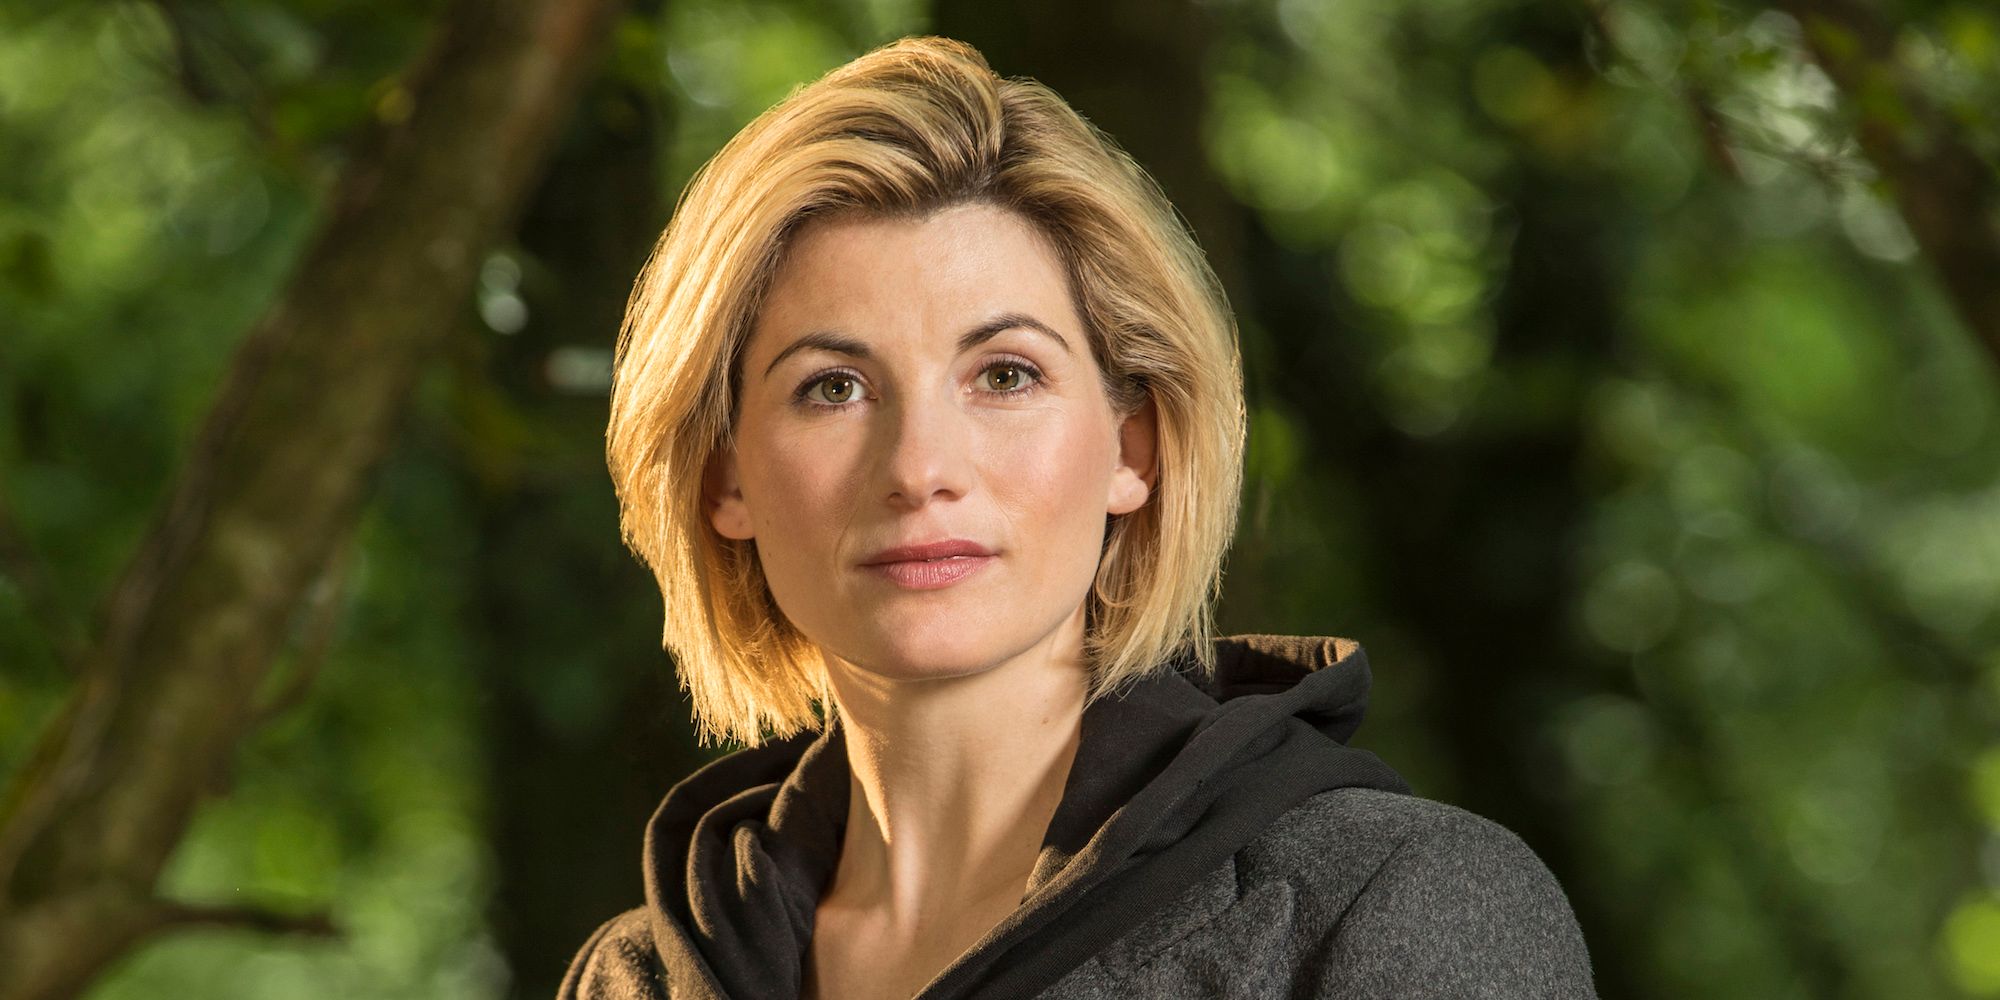 Jodie Whittaker wears a hoodie as the Thirteenth Doctor Who